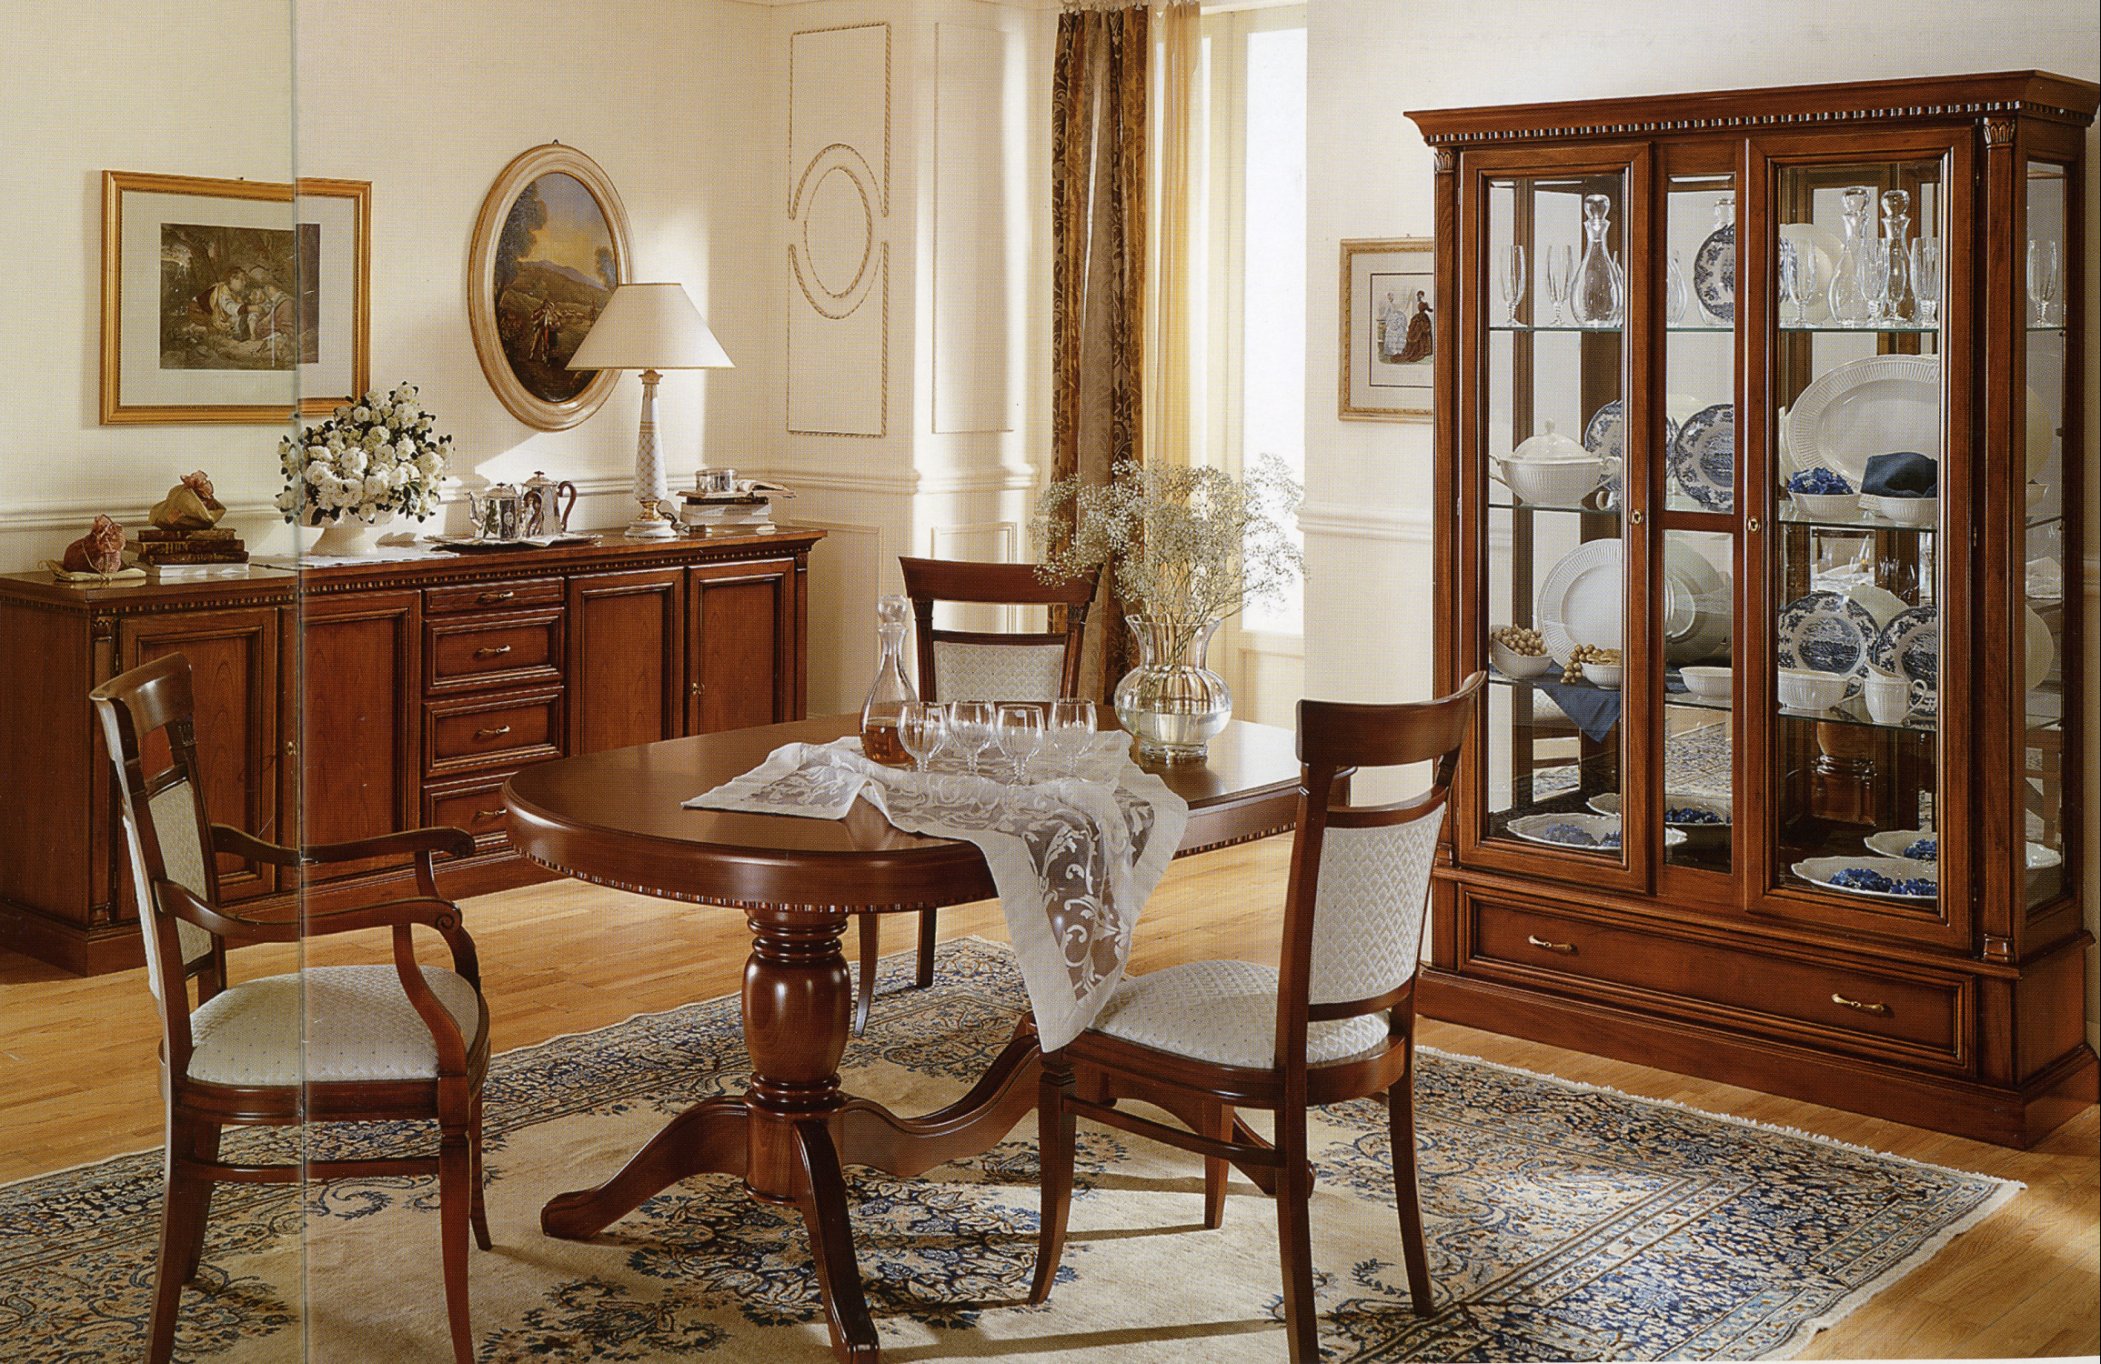 dining room images photo - 2